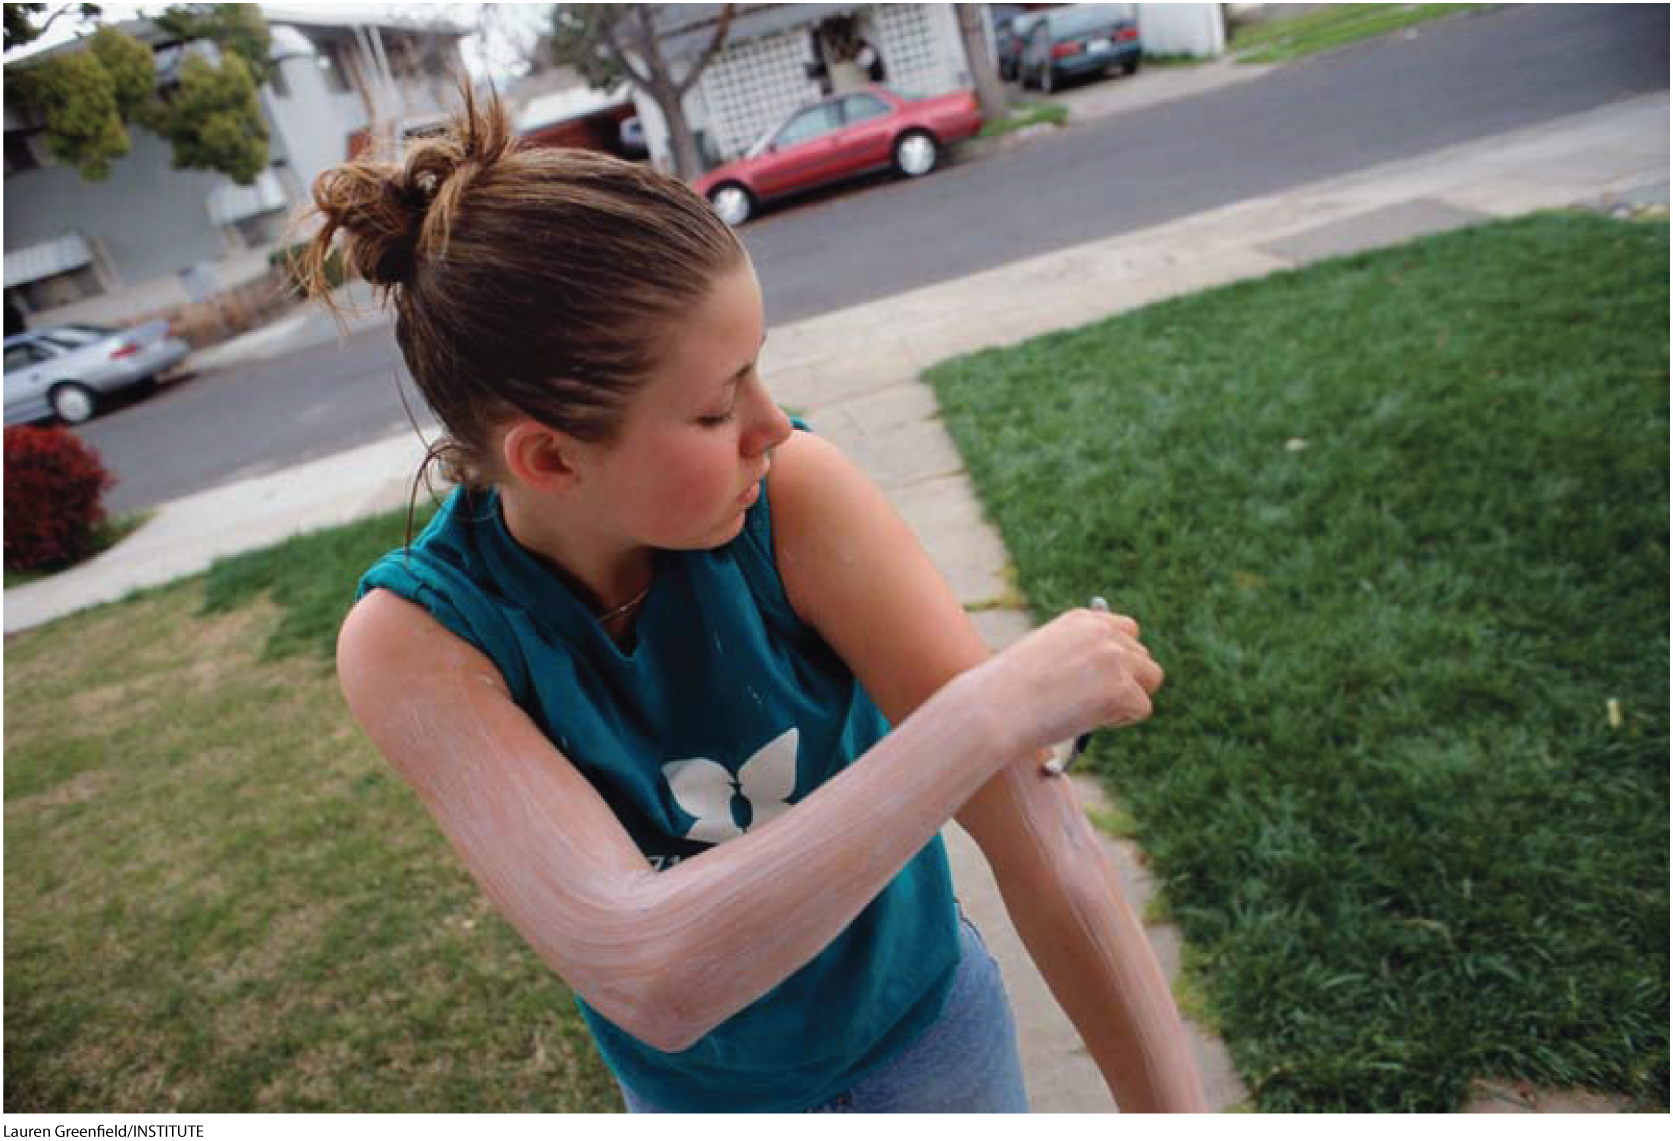 A photo shows a girl shaving her arms.